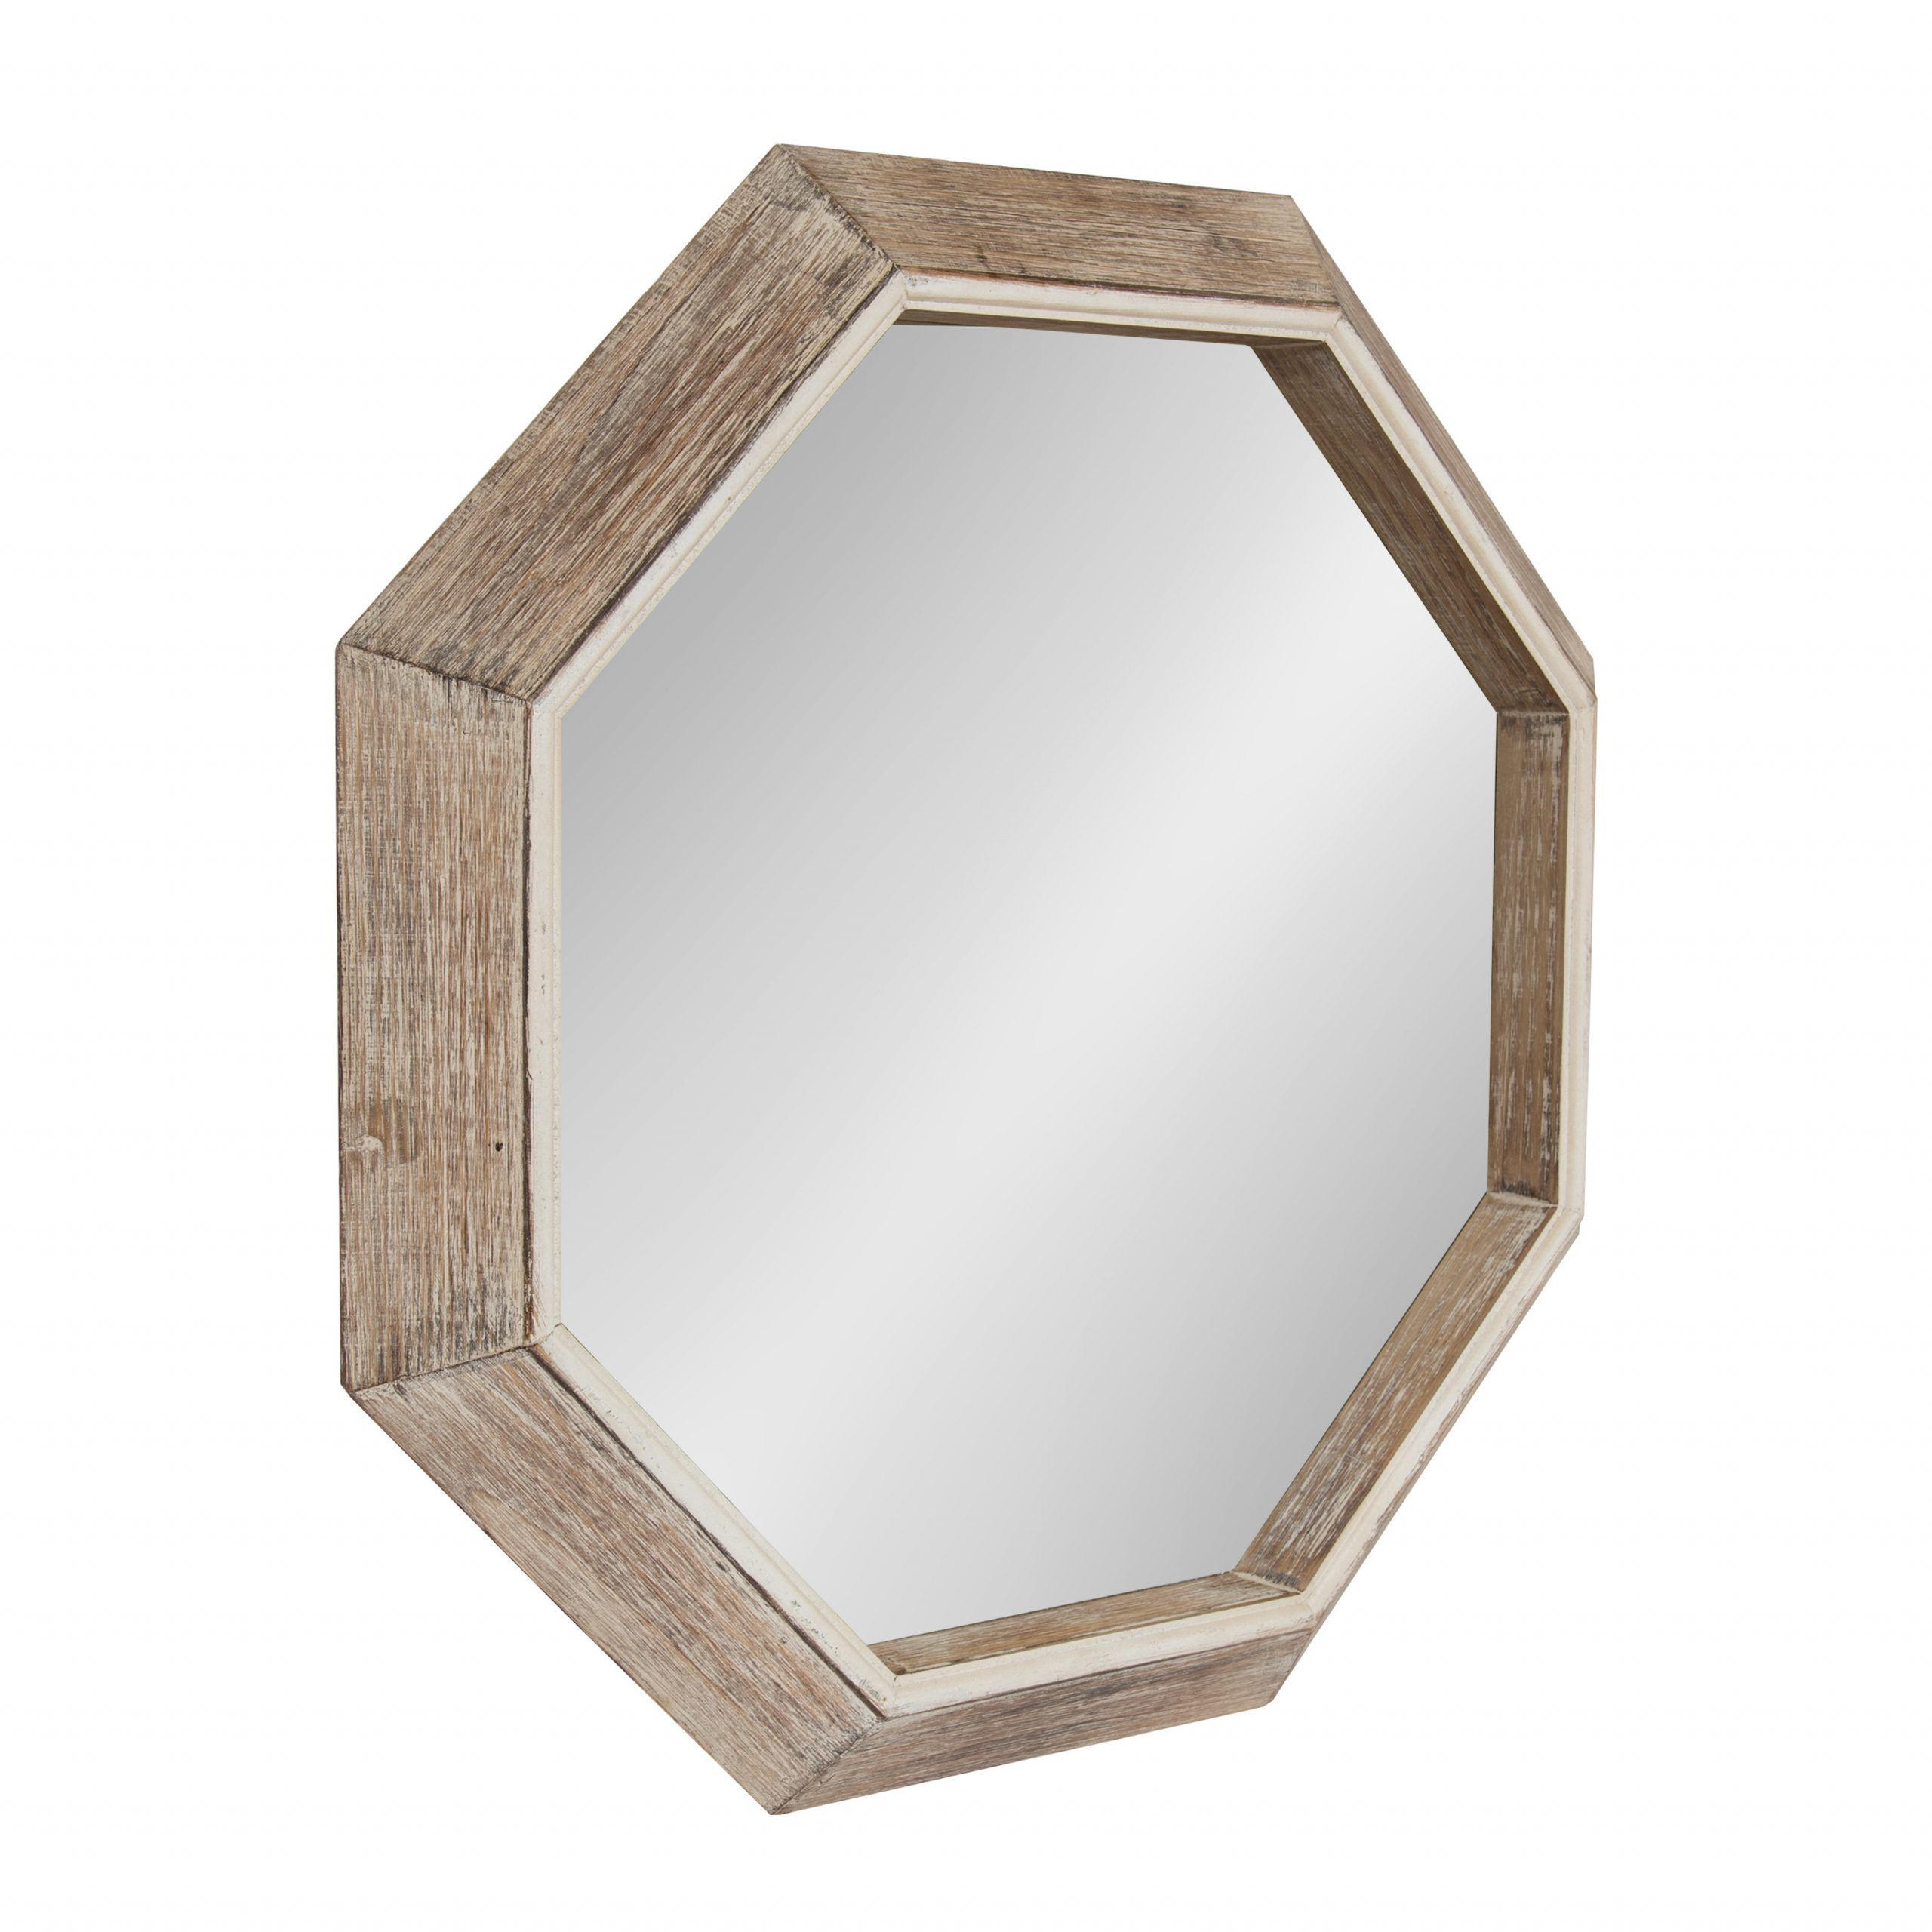 Kate And Laurel – Yves Large Rustic Wooden Octagon Wall Mirror, White Regarding Matte Black Octagonal Wall Mirrors (View 8 of 15)